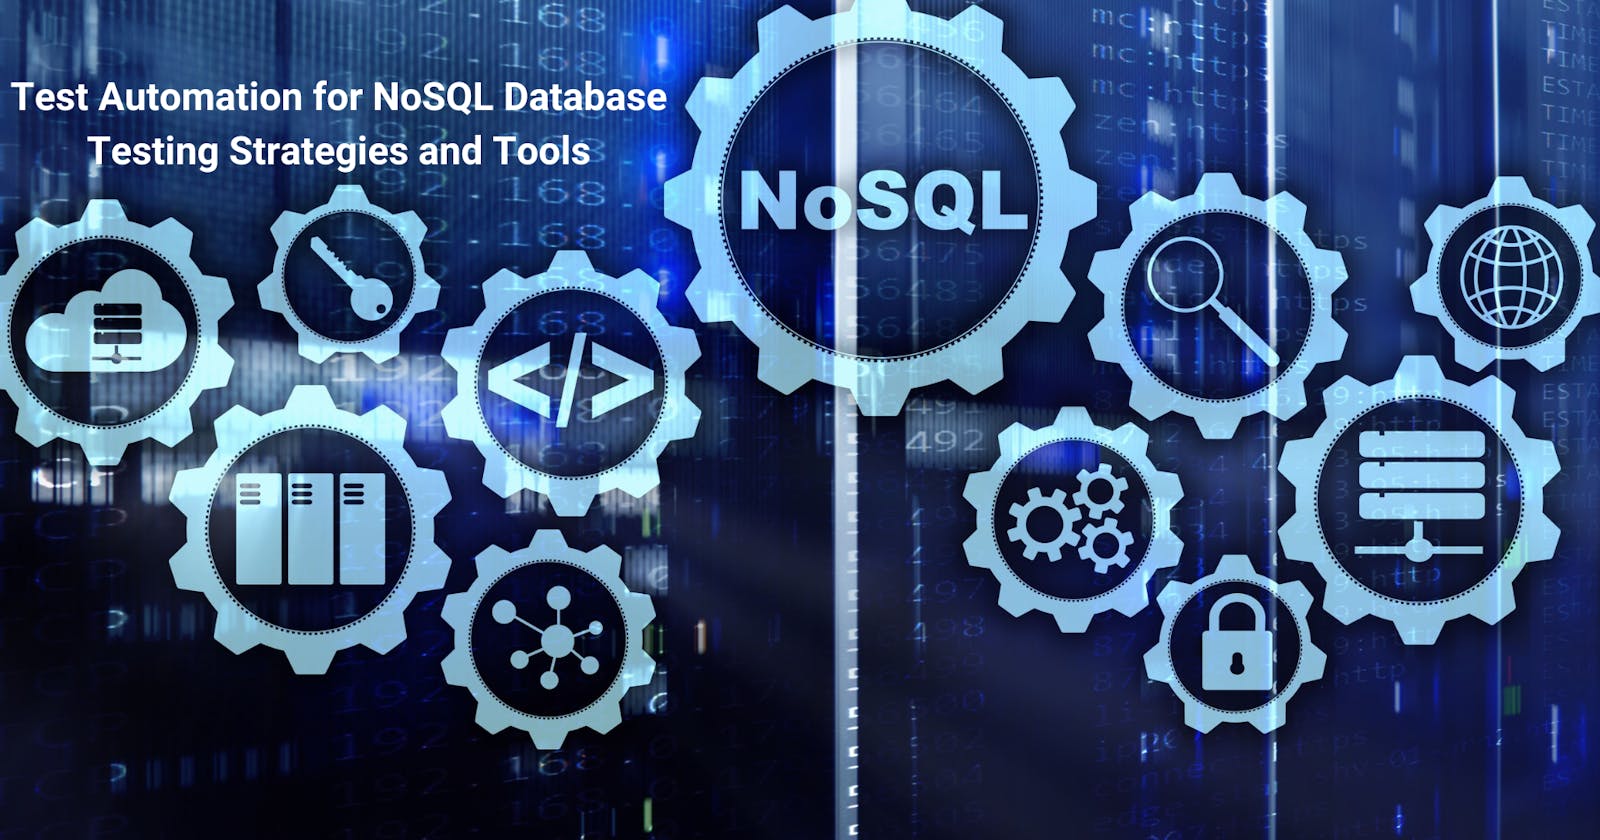 Test Automation for NoSQL Database Testing Strategies and Tools